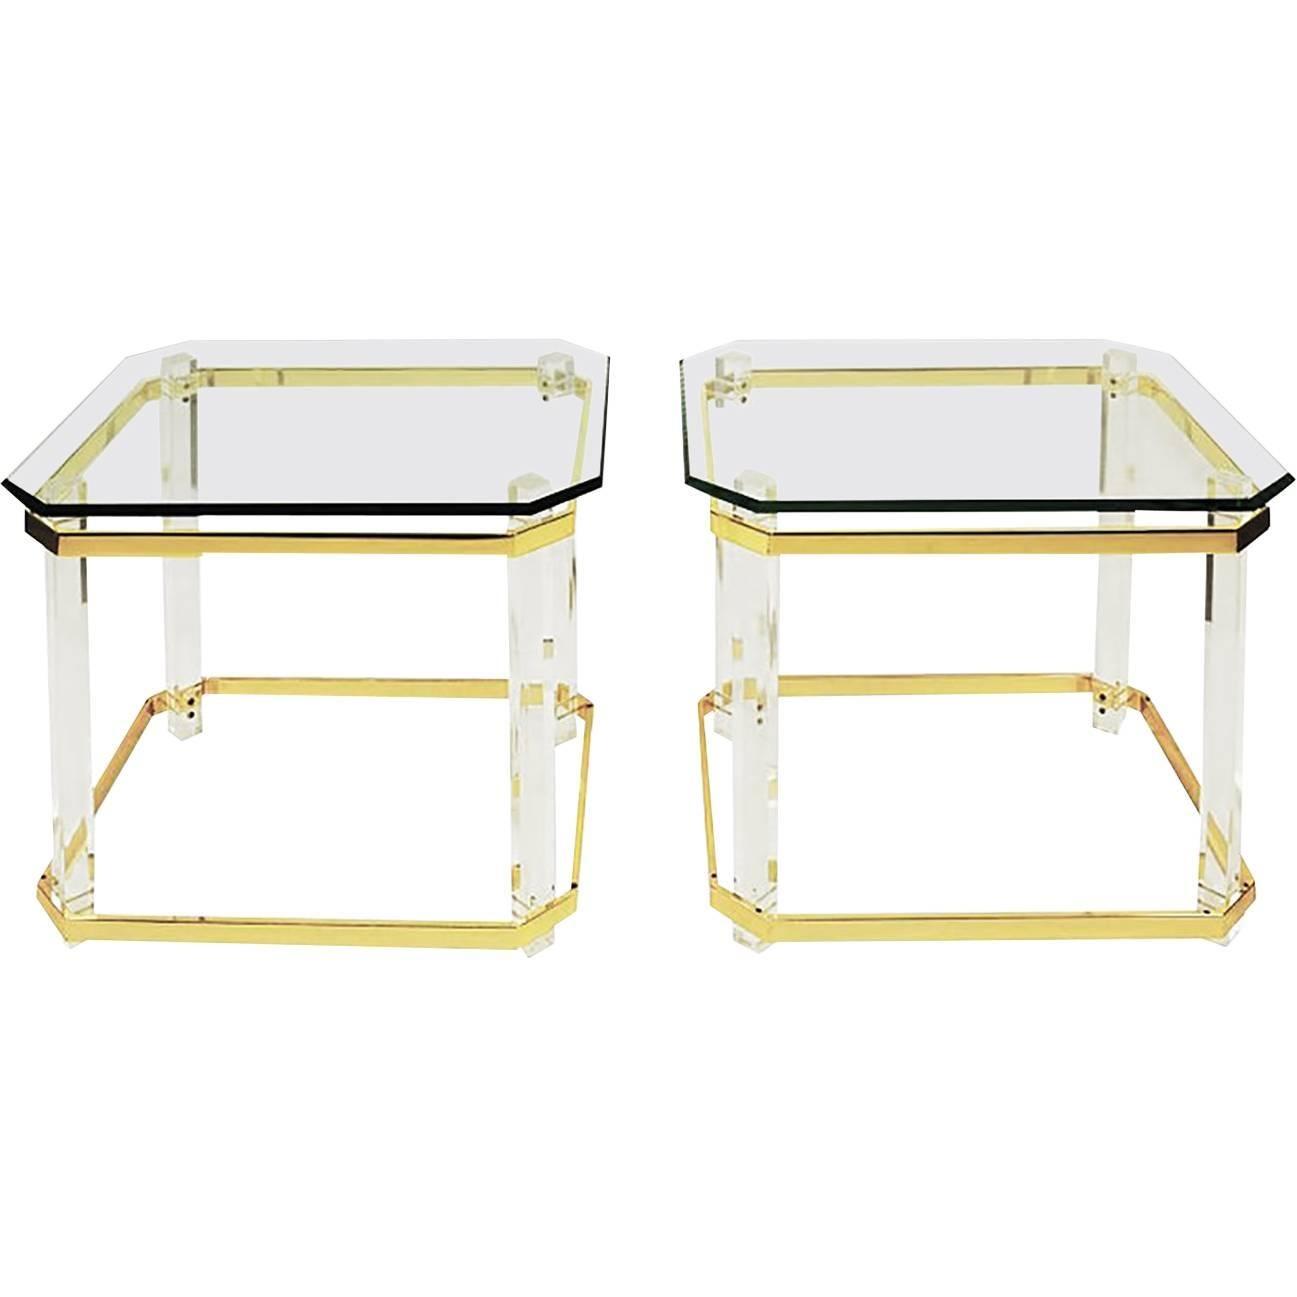 Charles Hollis Jones Lucite, Brass and Glass "Clipped Corner" Side Tables